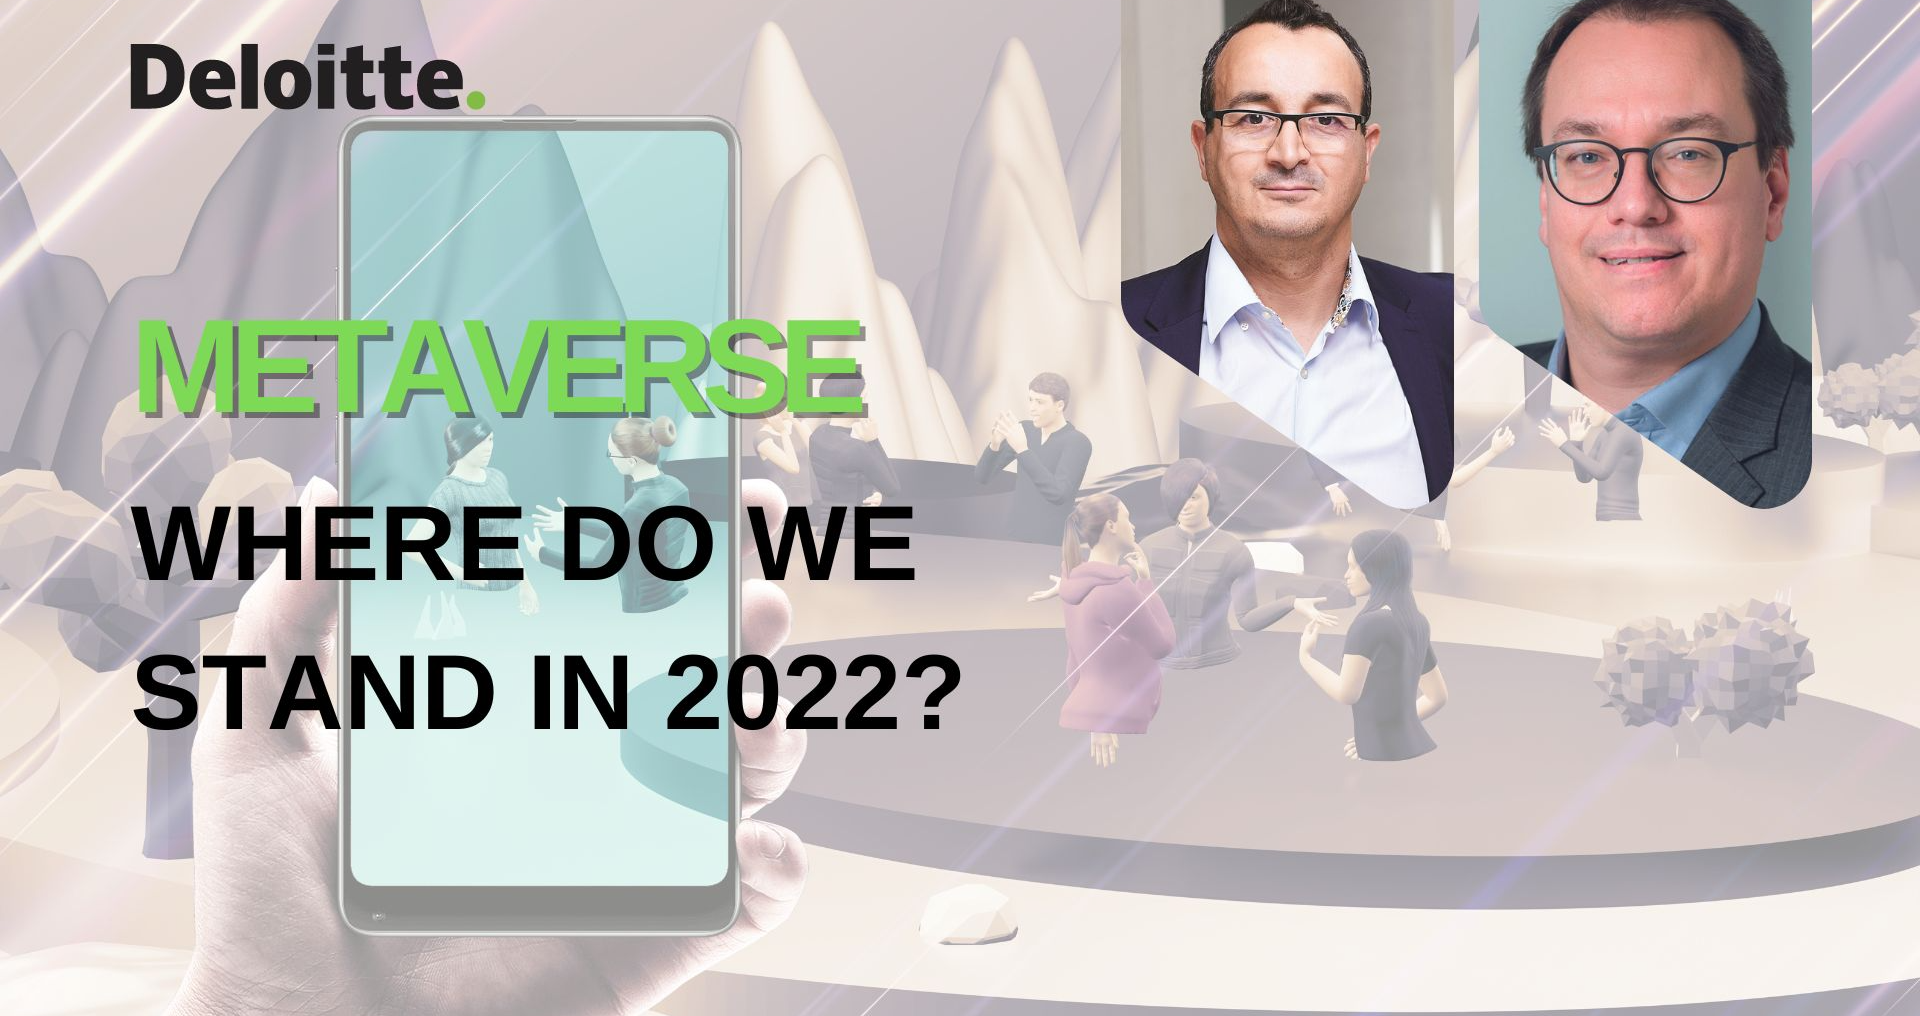 Where do we stand in 2022?